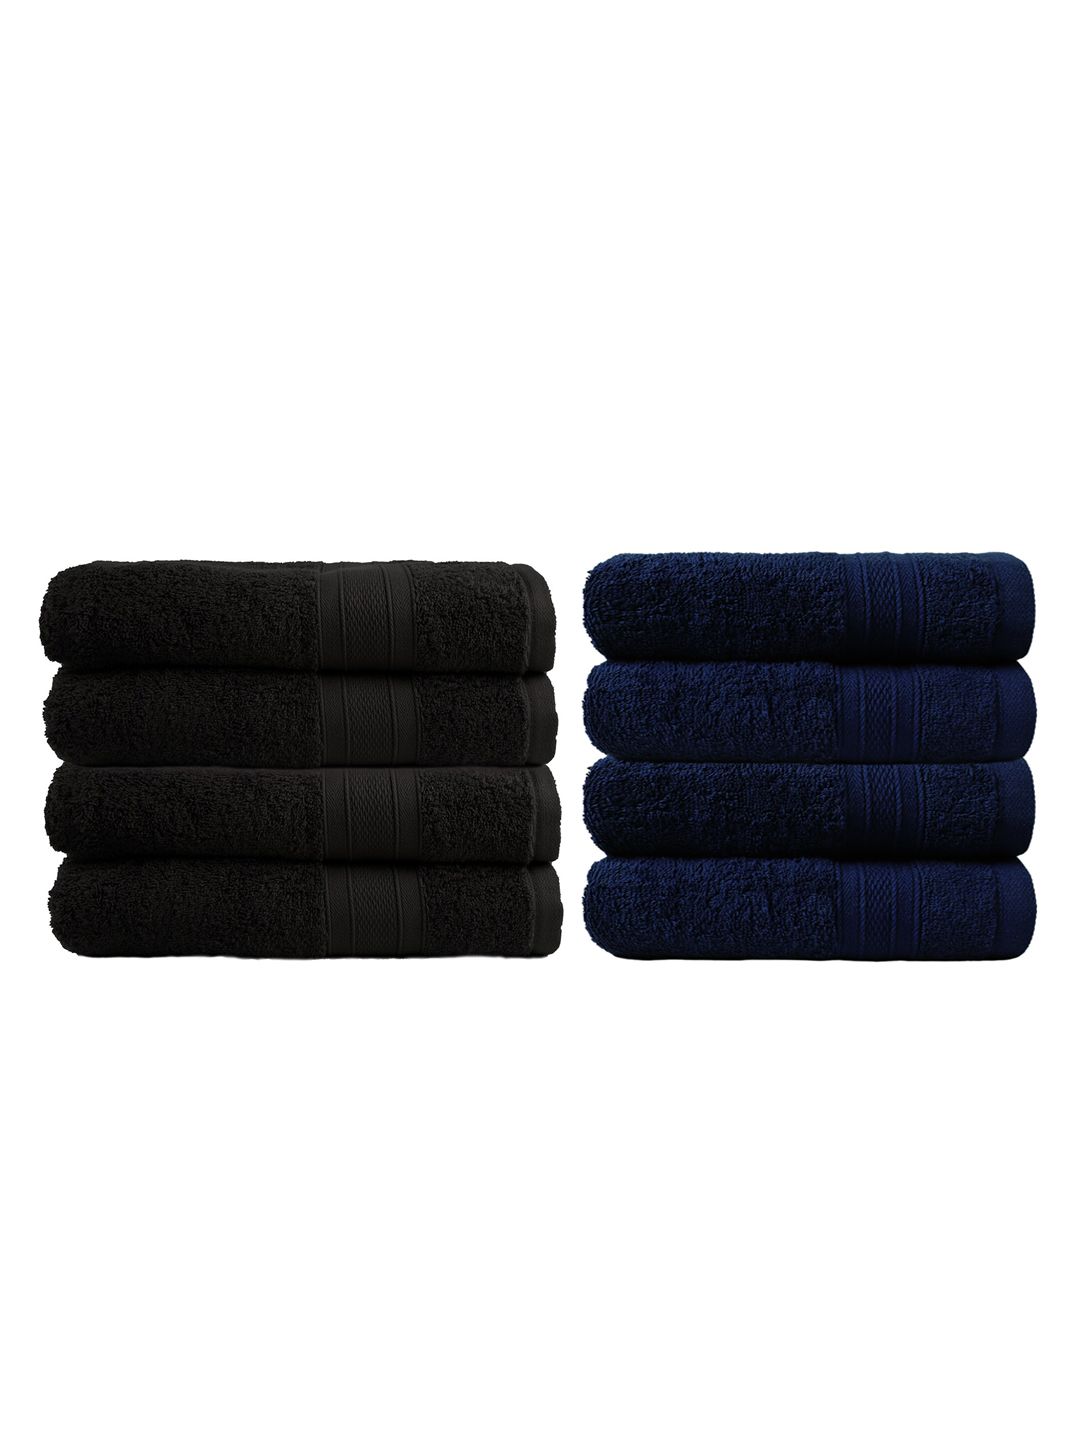 Trident Black Set of 4 500 GSM Cotton Bath Towels & Set of 4 Hand Towels Price in India